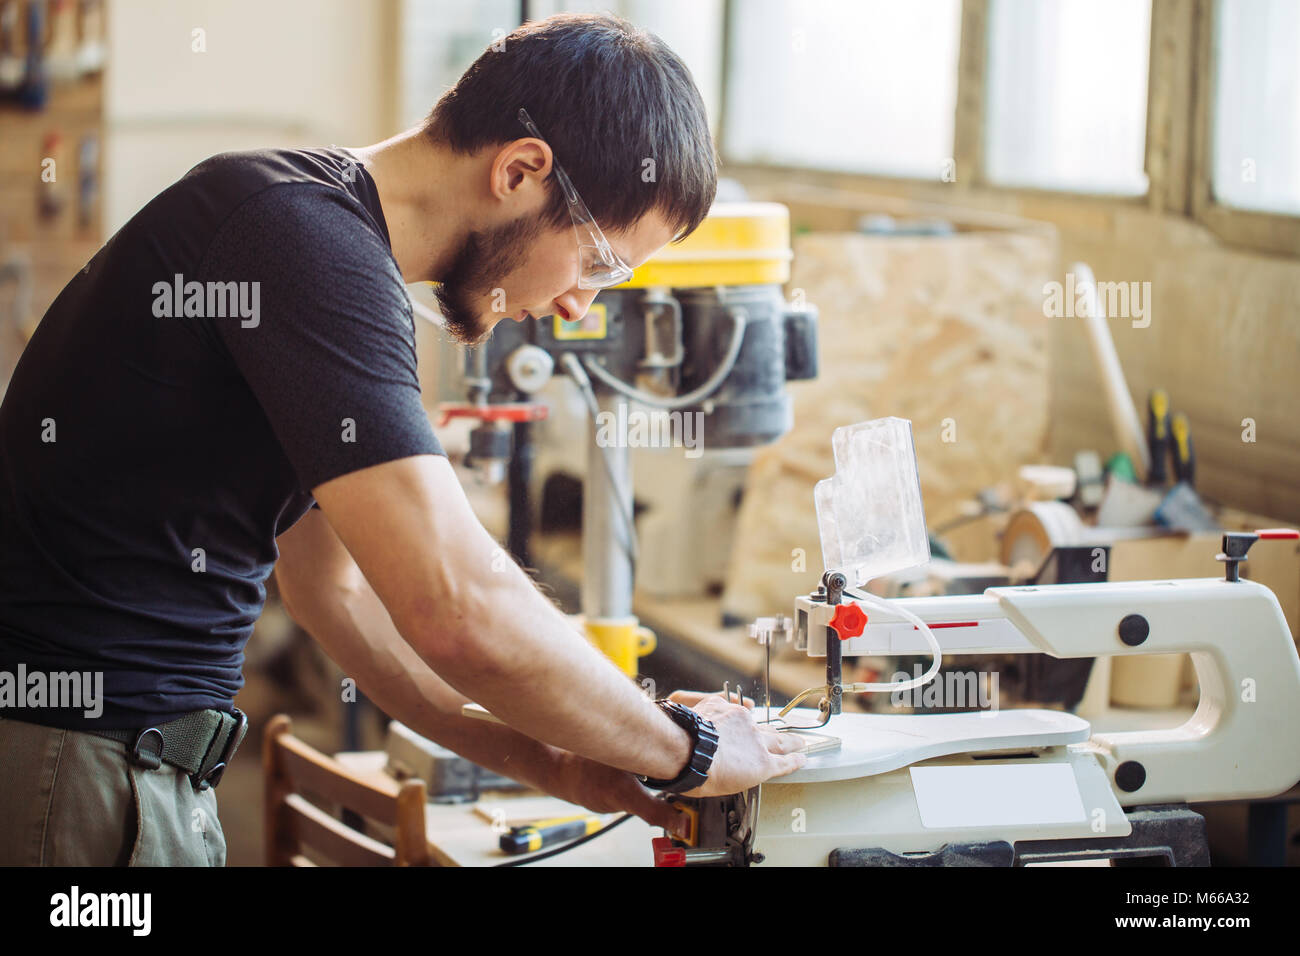 Carpenter engaged in processing wood at the sawmill. Stock Photo